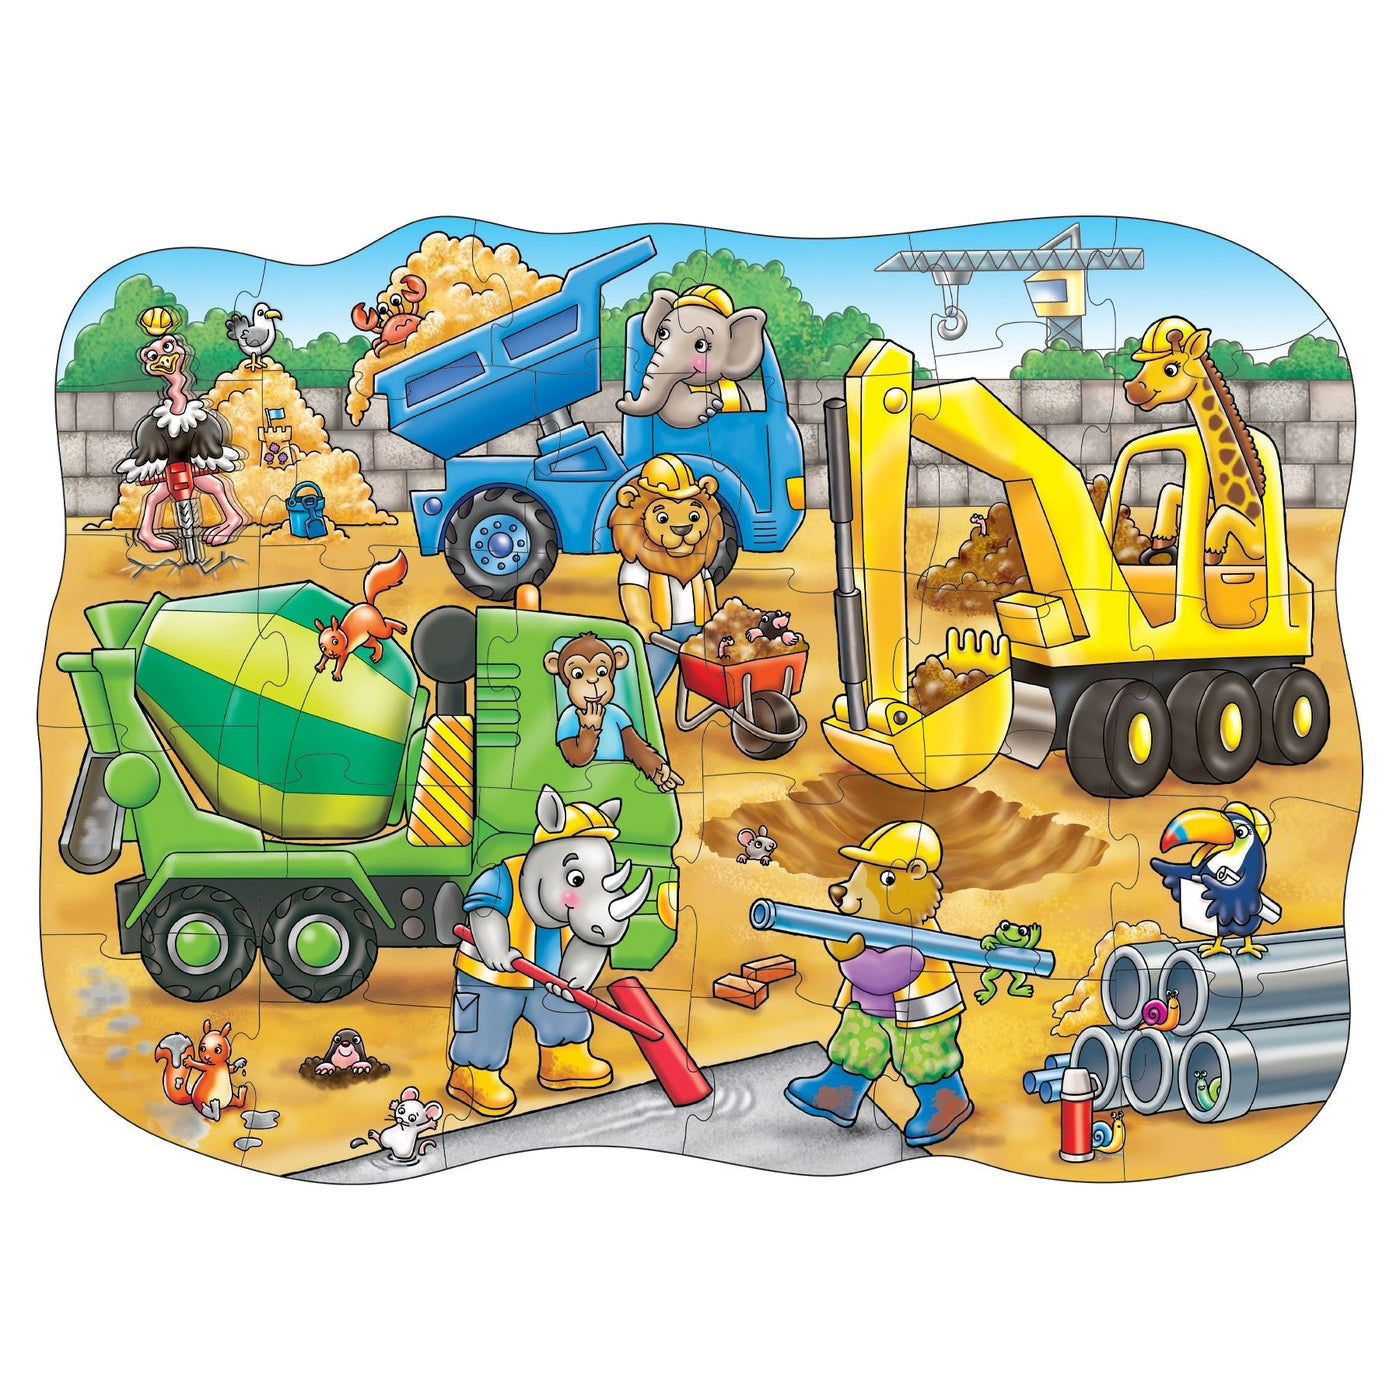 Orchard Toys Busy Builders 30 Piece Jigsaw Puzzle